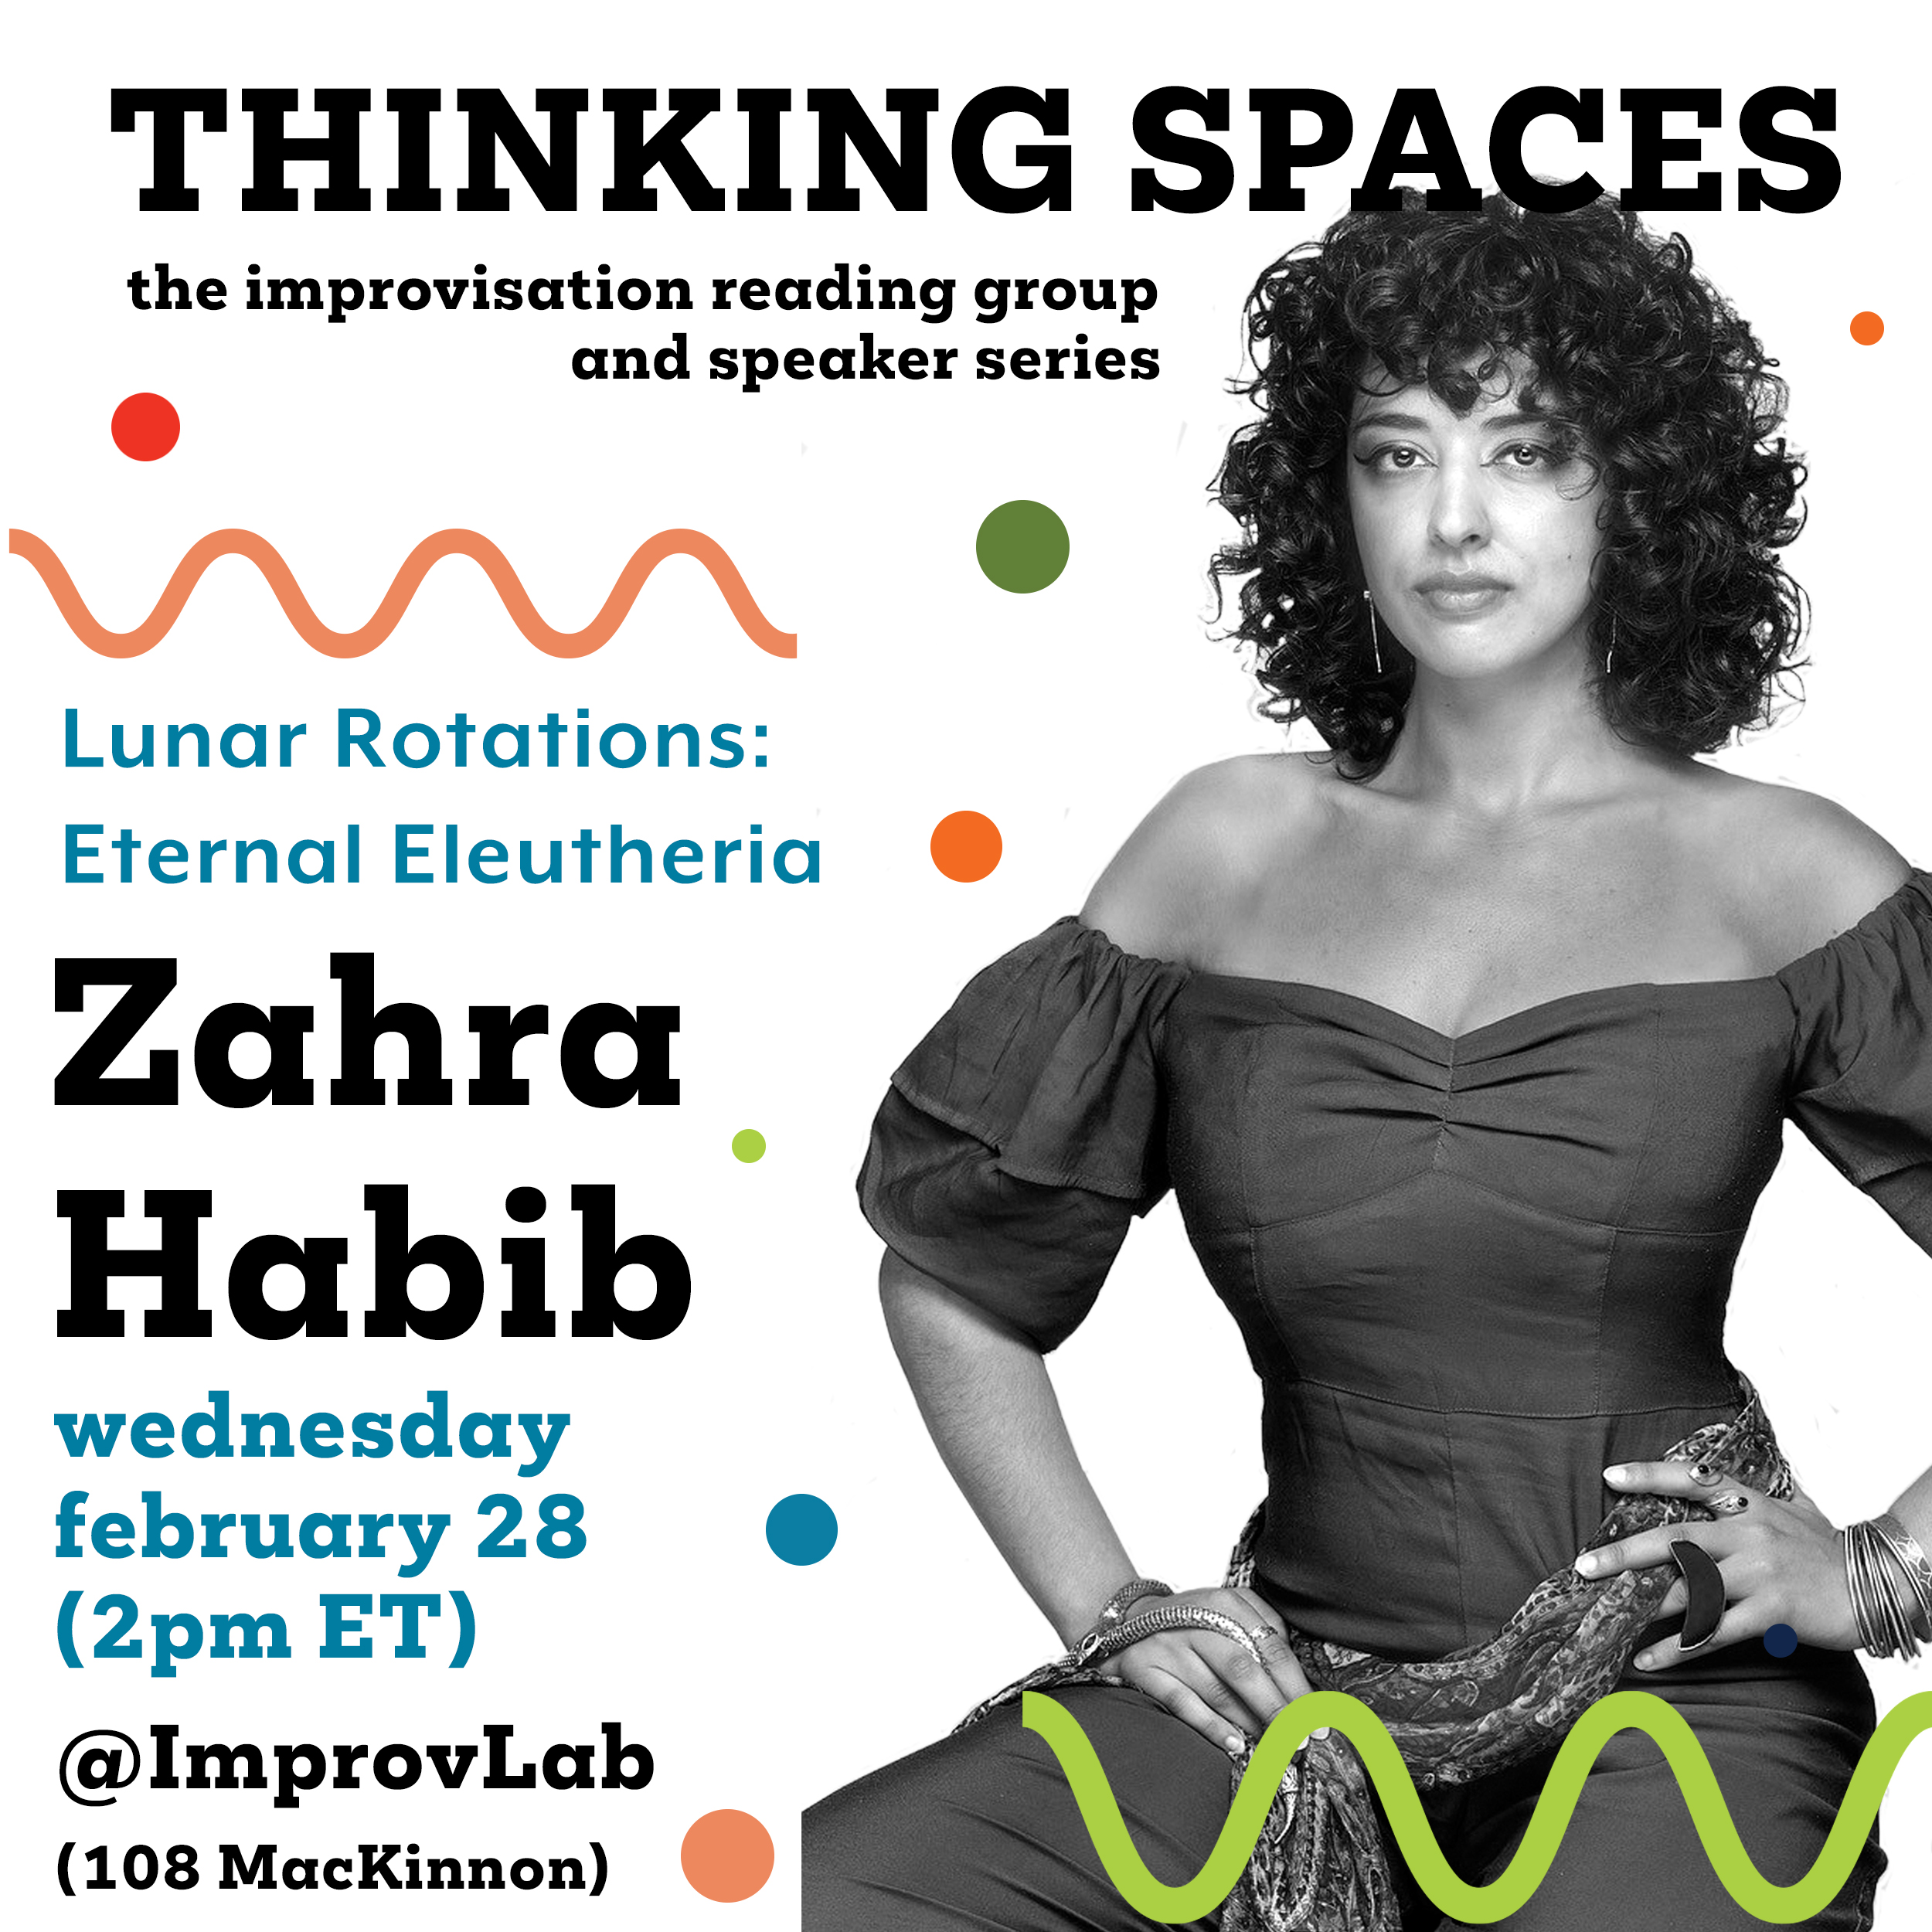 Thinking Spaces. The improvisation reading group and speaker series. Lunar rotations: Eternal Eleutheria. Zahra Habib. Wednesday February 28, 2 p.m. ET @ImprovLab 108 MacKinnon. Photo of Zahra sharing at the camera straight-faced, wearing an off-shoulder jumpsuit with her hands on her hips.